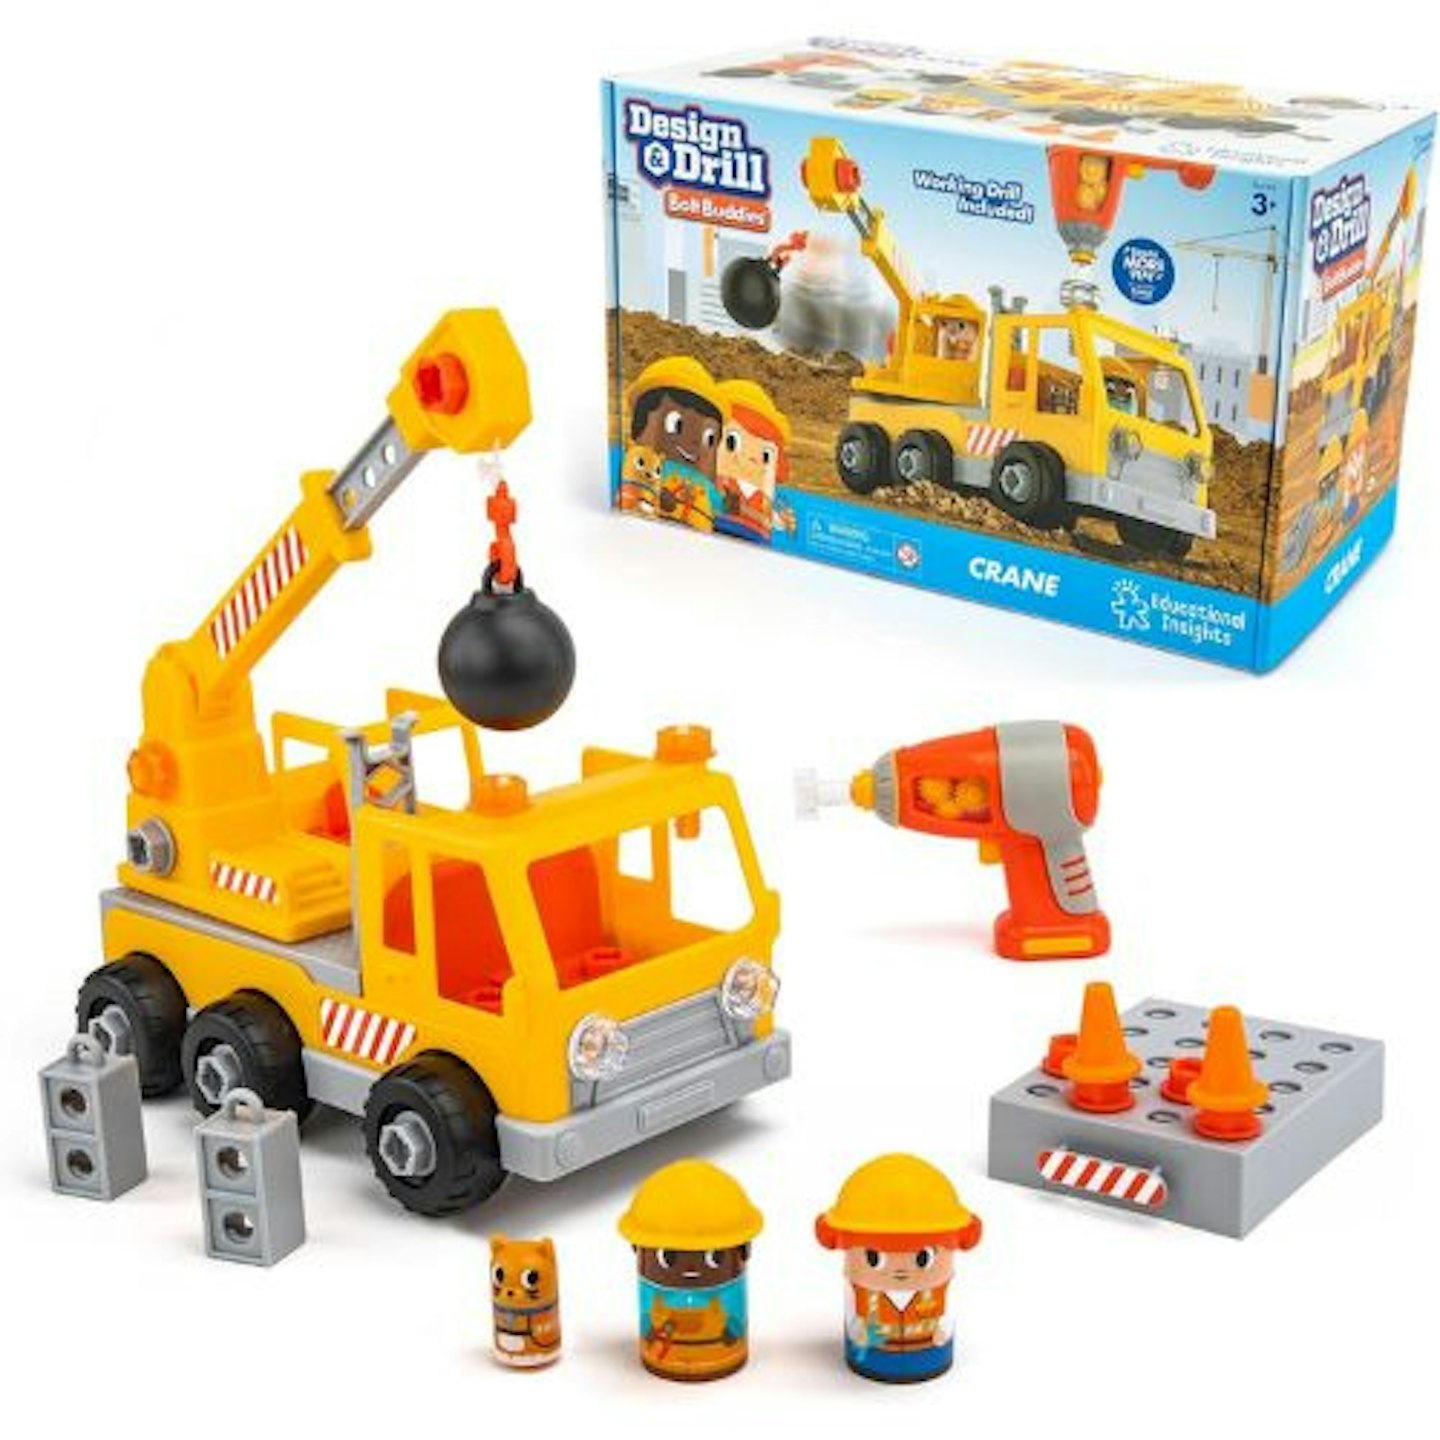 Best Christmas present for toddlers Design and Drill Bolt Buddies Crane